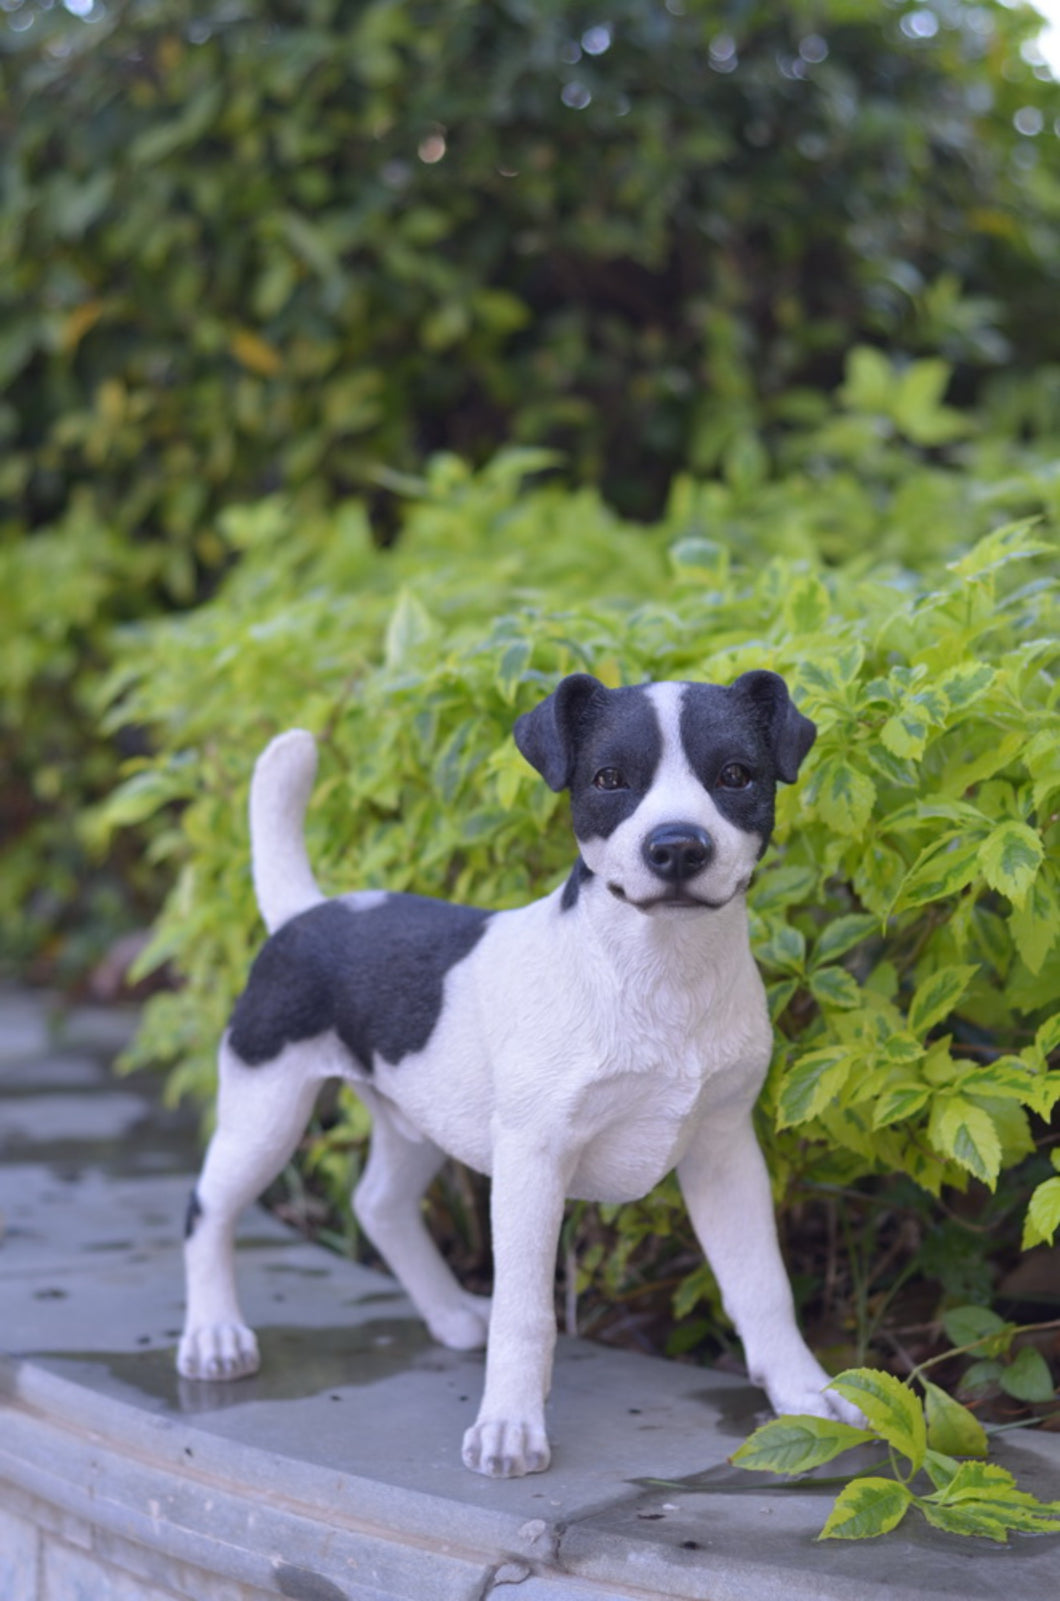 87747 - DOG-JACK RUSSELL STANDING